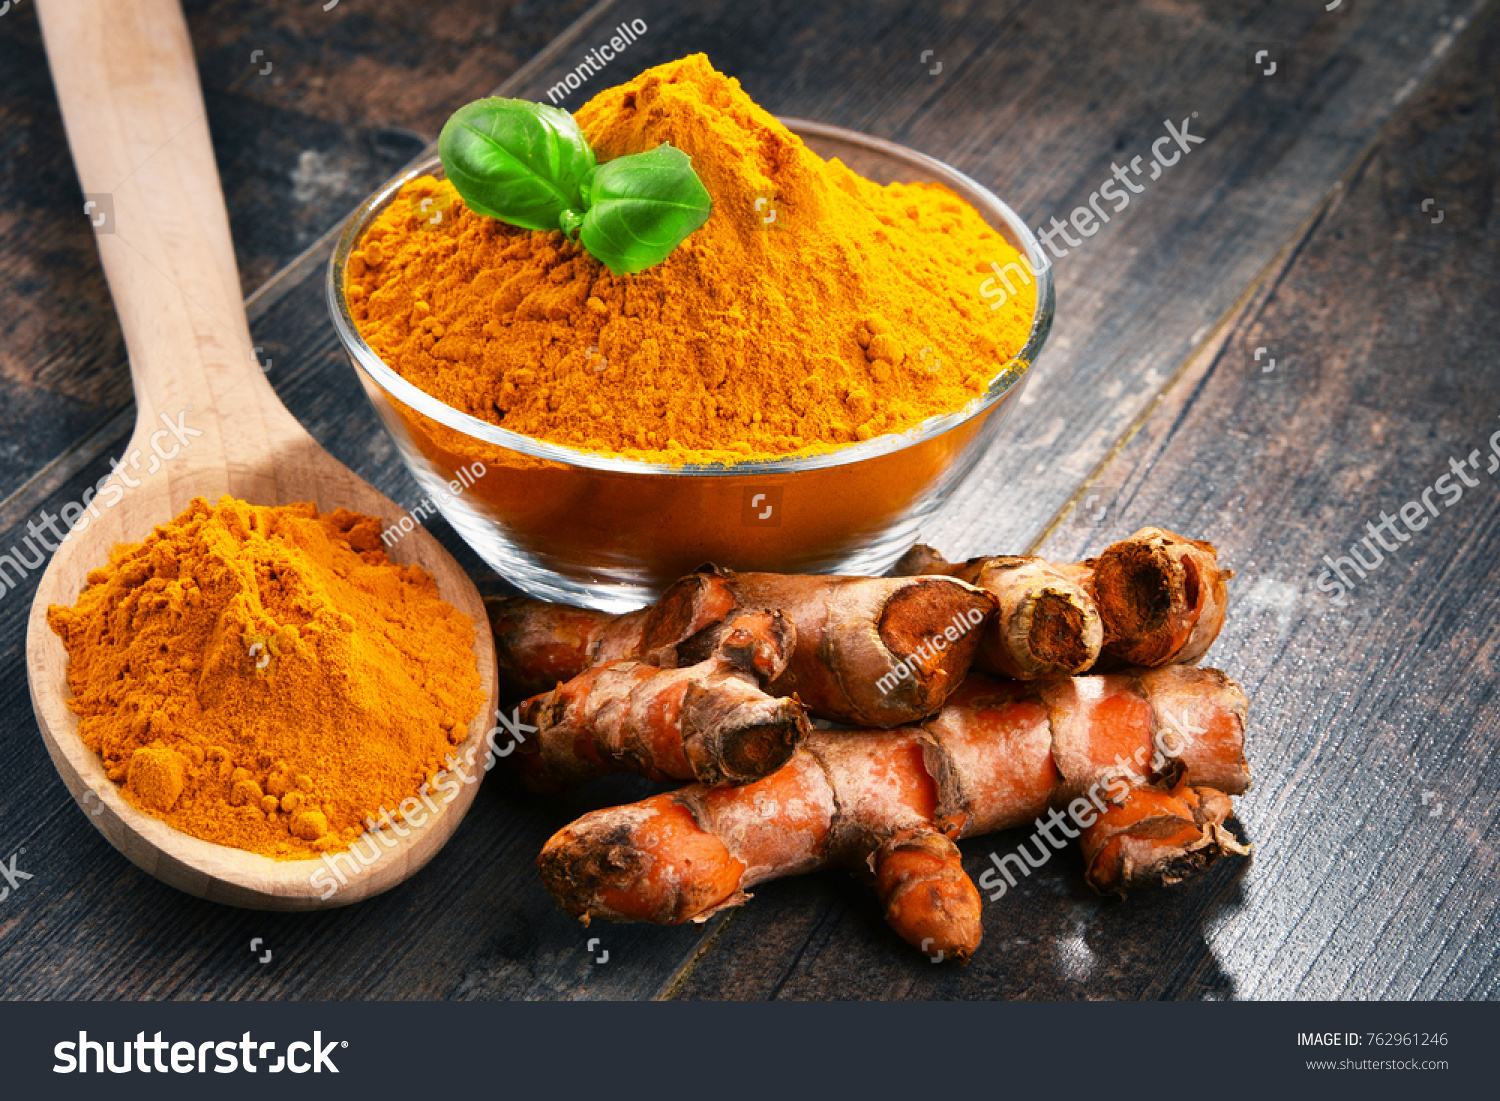 Composition with bowl of turmeric powder on wooden table. #762961246